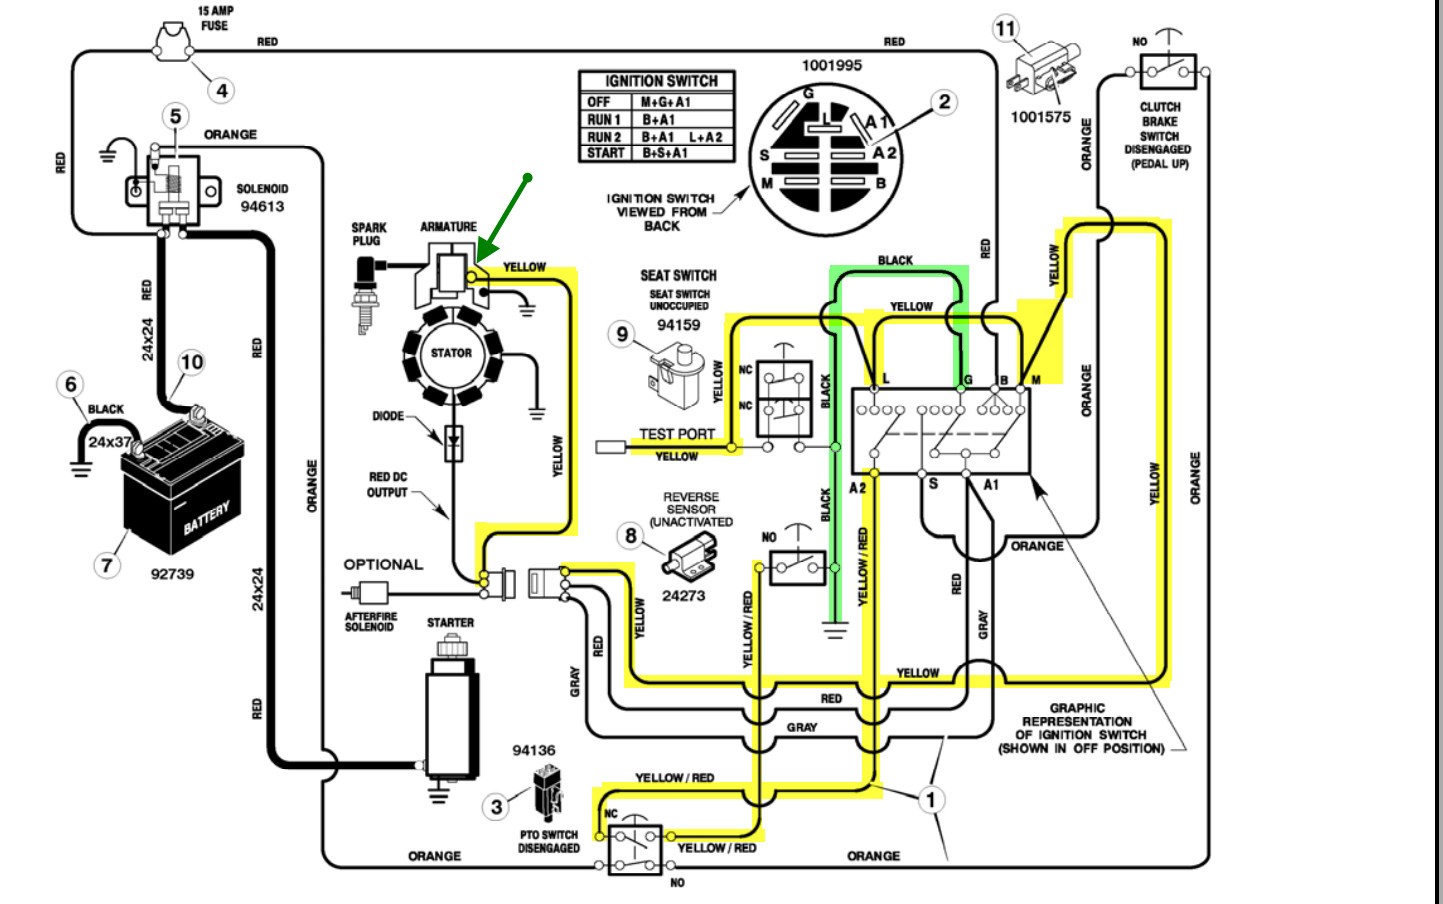 Wiring Diagram Briggs And Stratton 18 Hp Opposed Twin Best 20 1